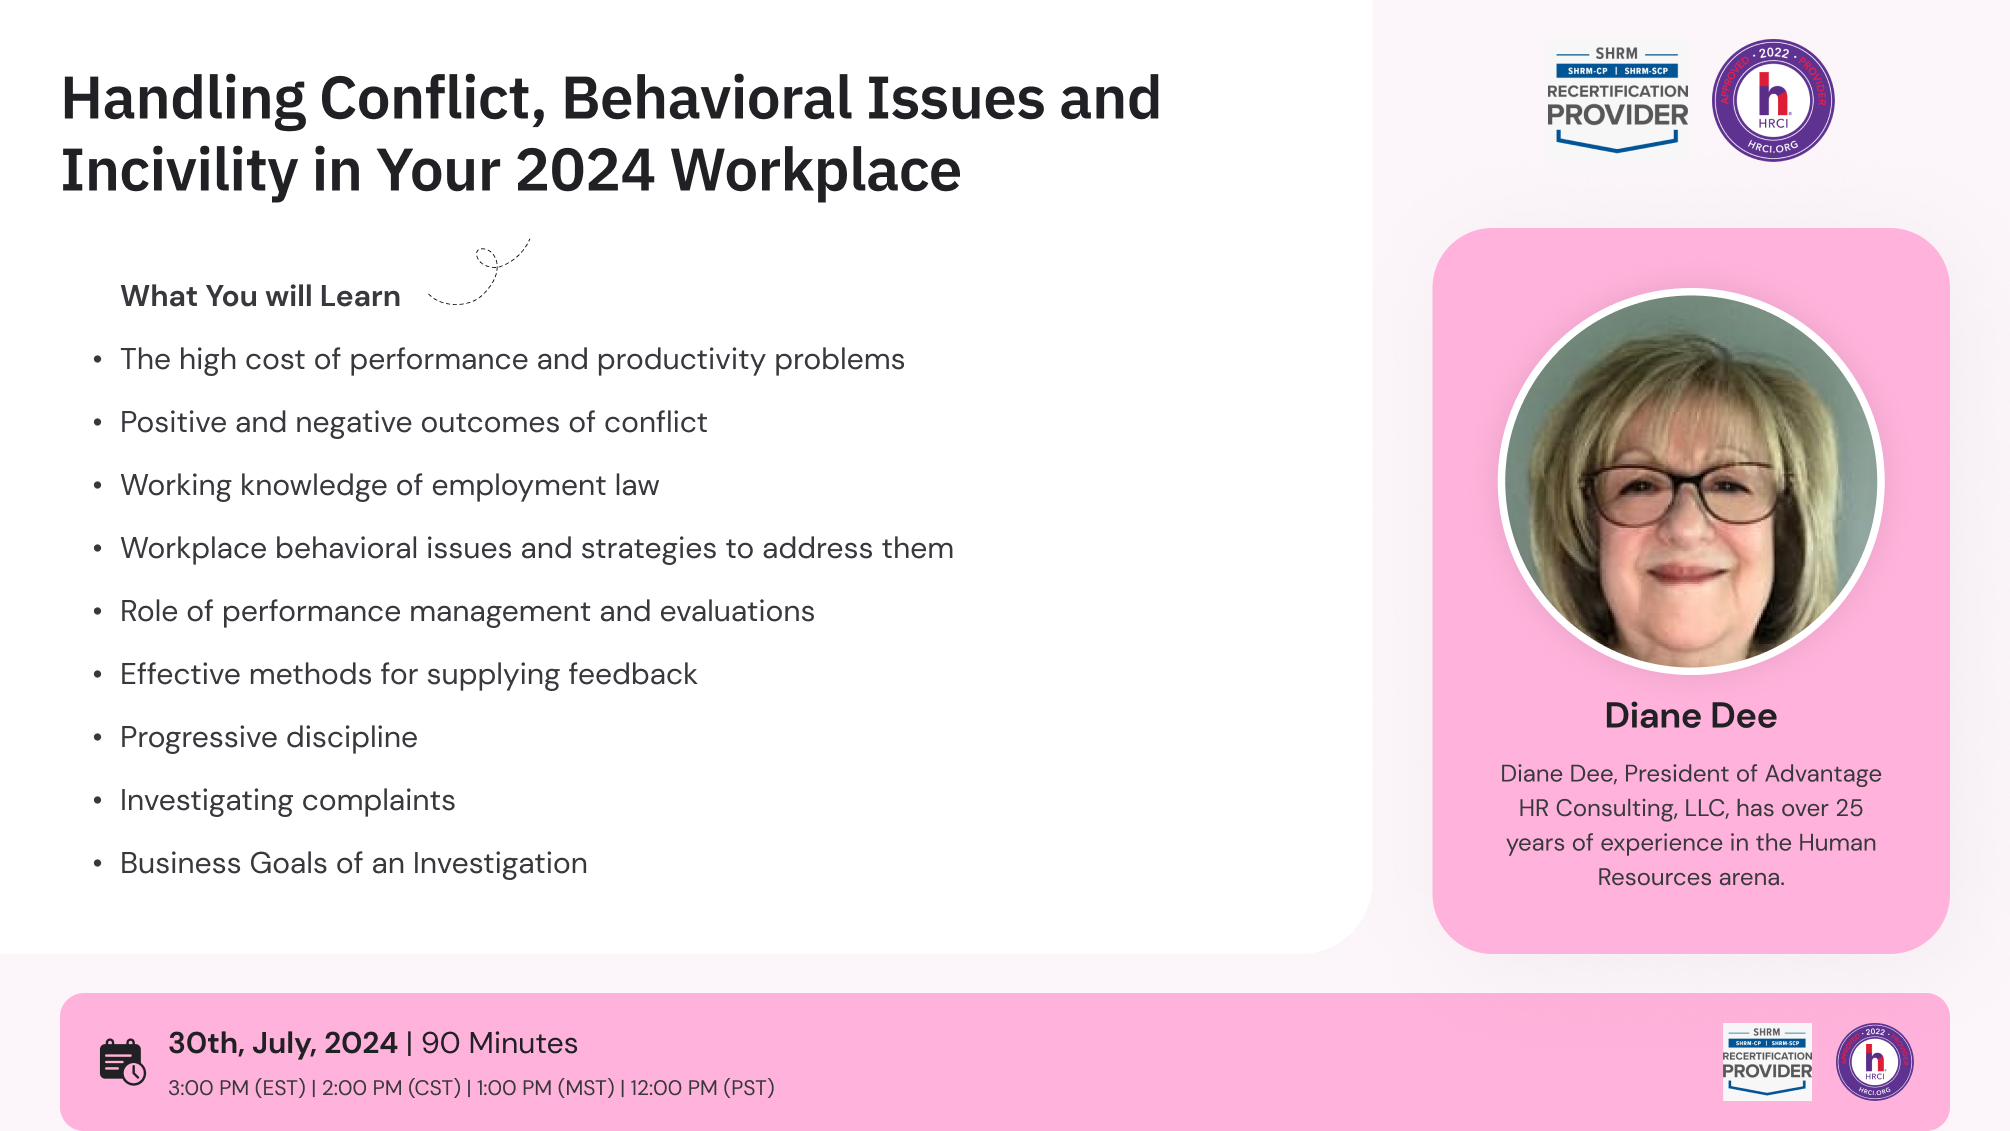 Handling Conflict, Behavioral Issues and Incivility in Your 2024 Workplace